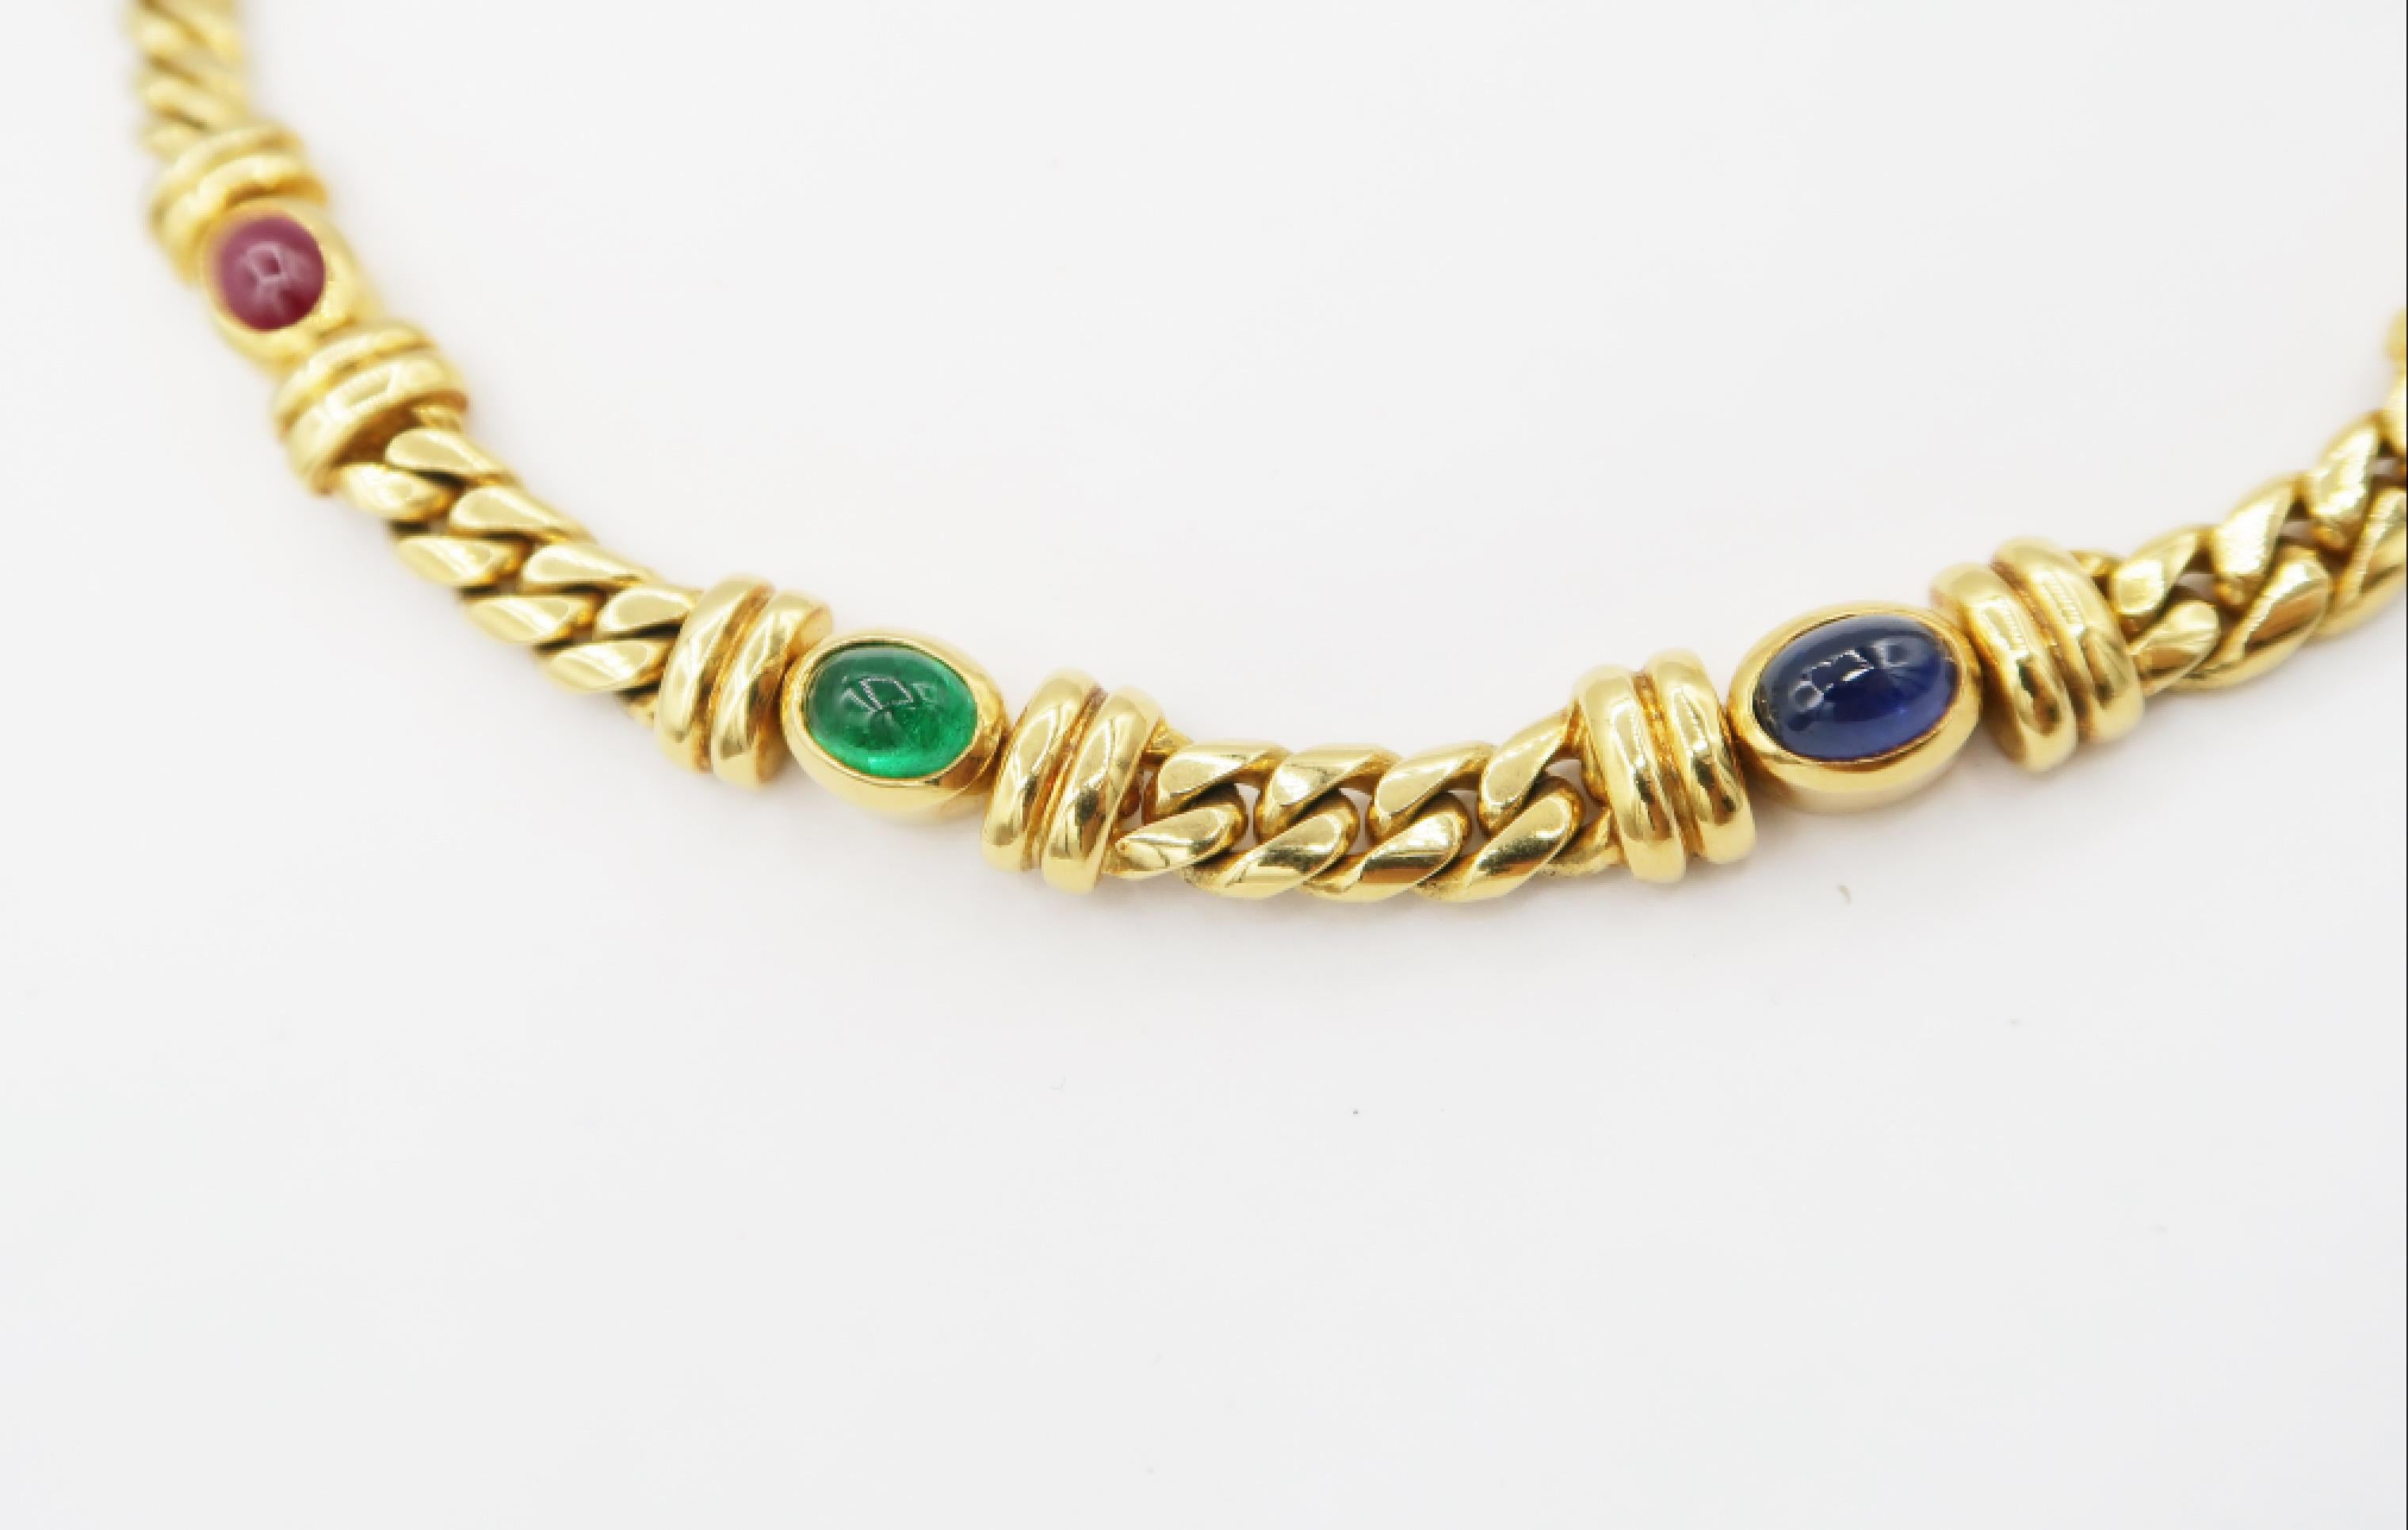 Cabochon Ruby Sapphire Emerald 18K Gold Curb Chain Necklace with Invisible Clasp In Excellent Condition For Sale In Bangkok, TH